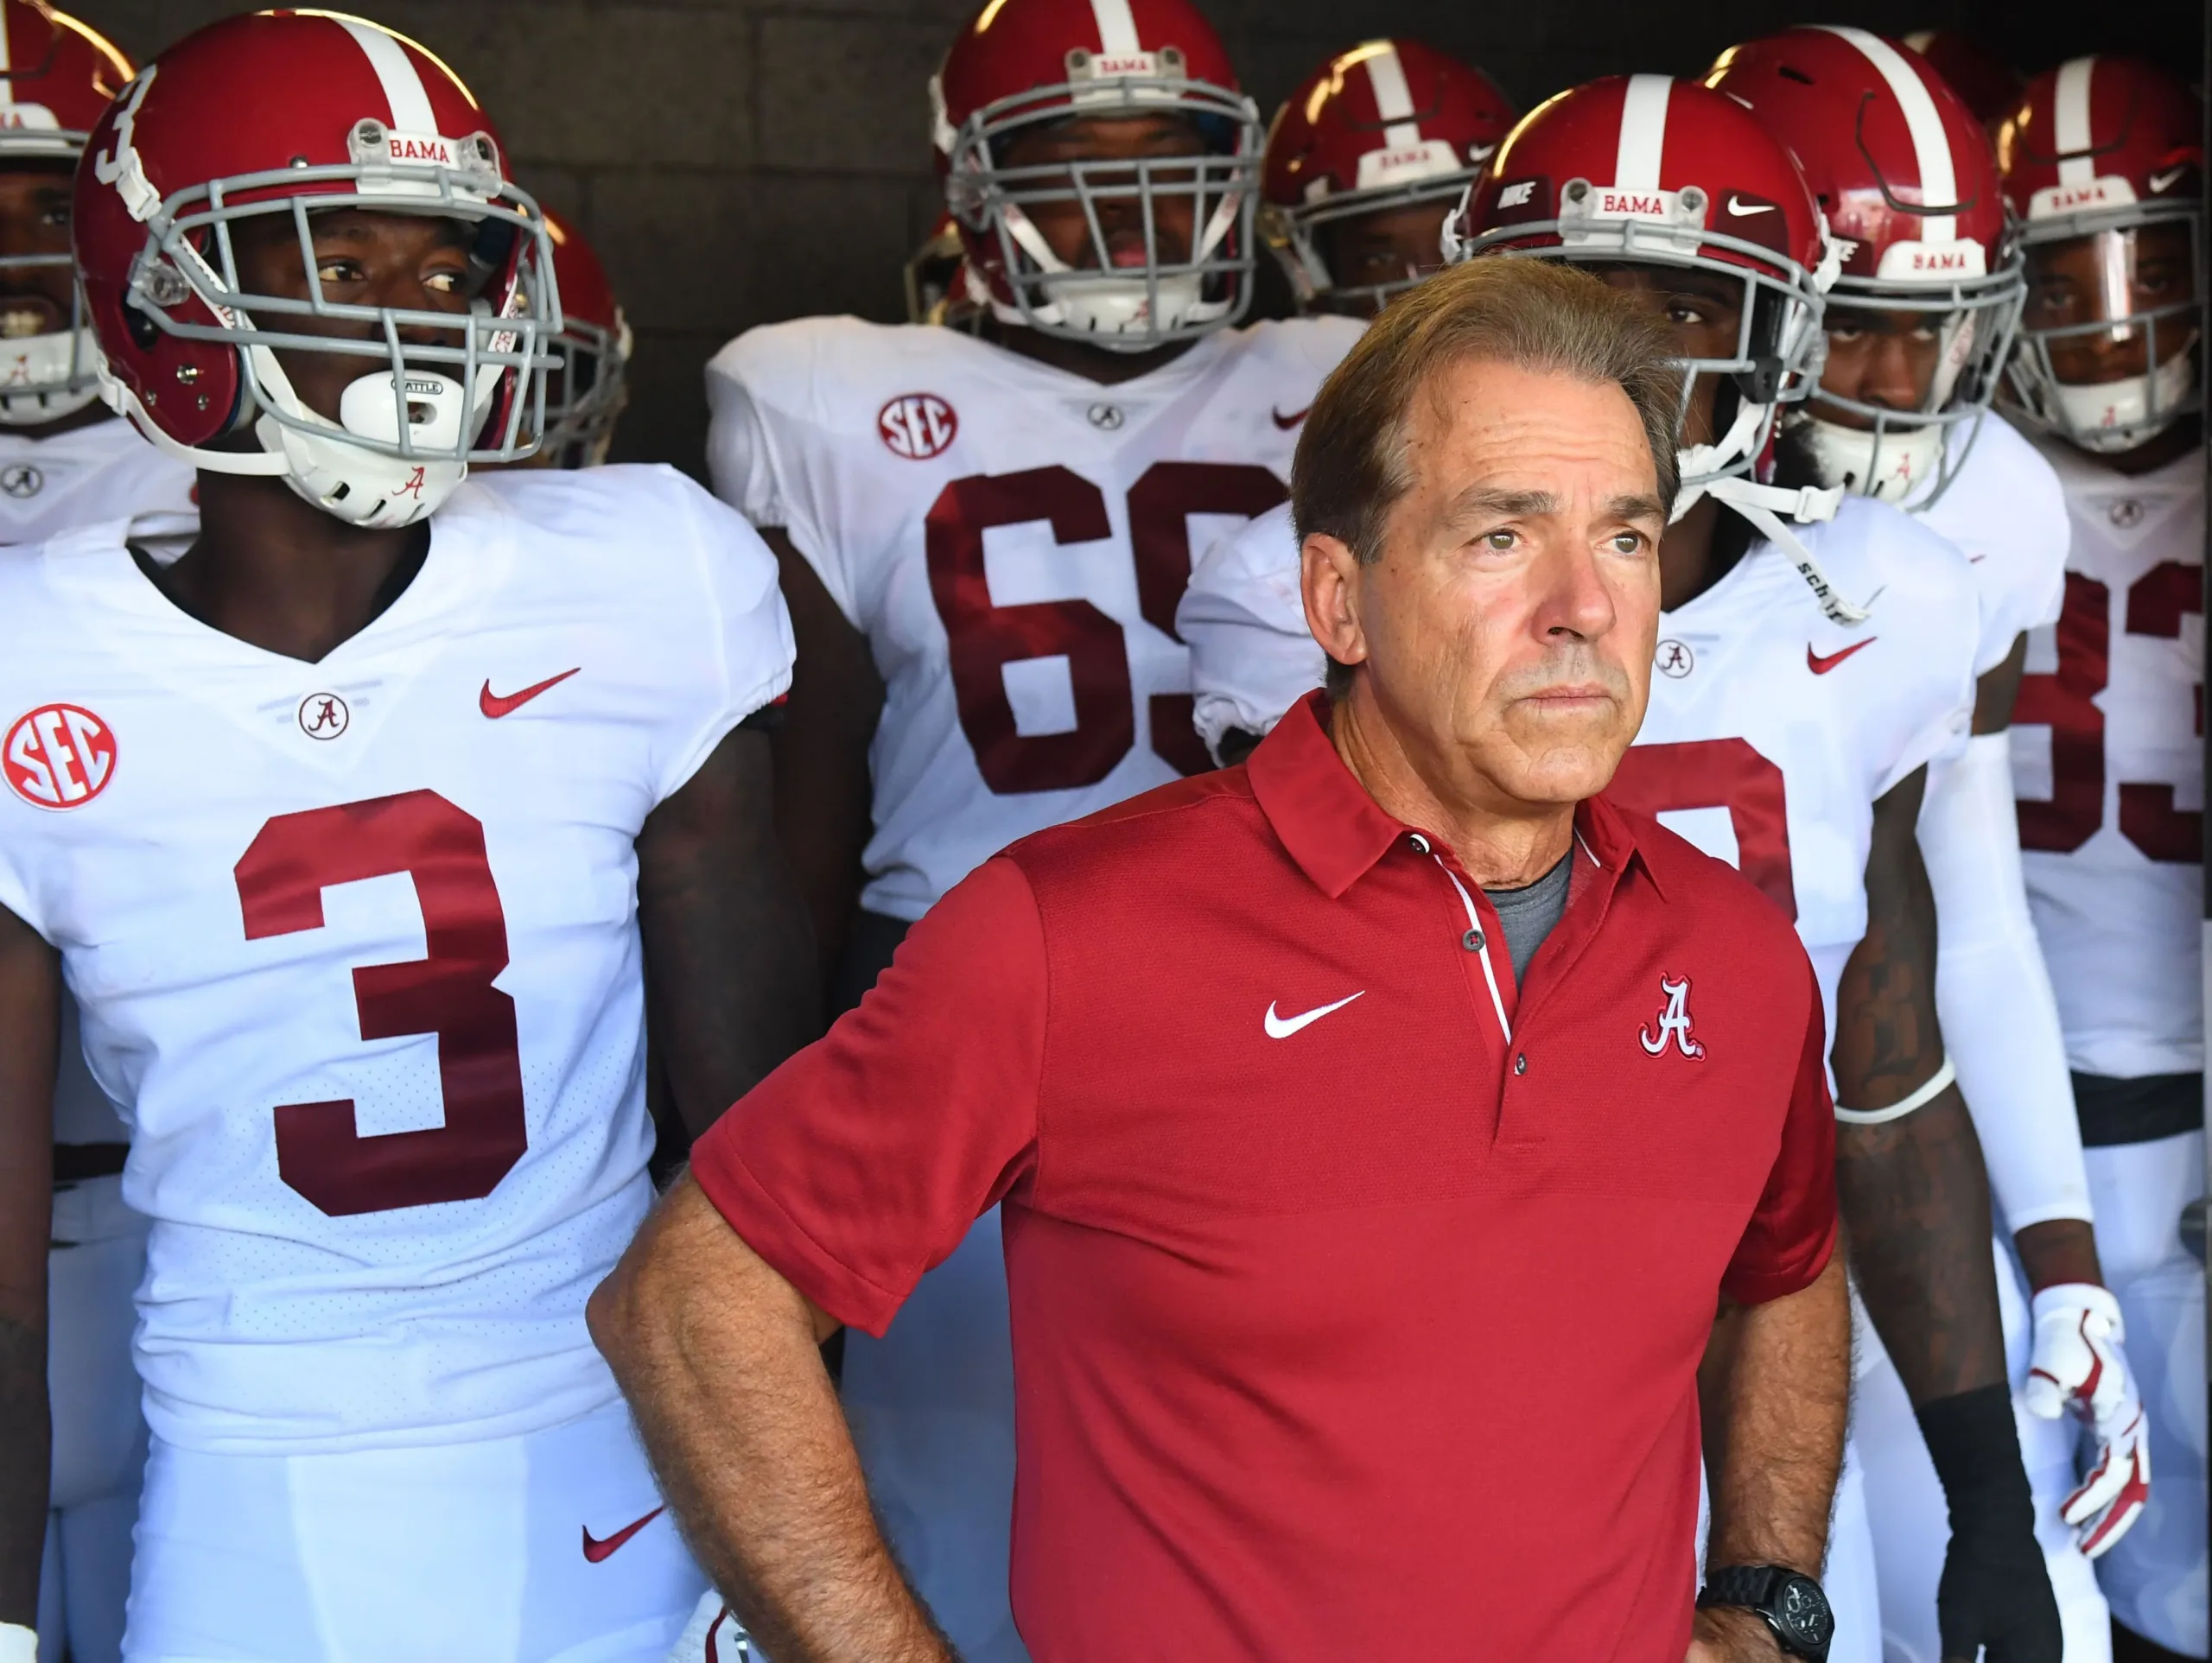 Nick Saban, who won more national championships than any coach in college football history, retired on Wednesday from the University of Alabama, where he dominated the sport for almost 18 seasons. (Photo courtesy of USATODAY.COM)